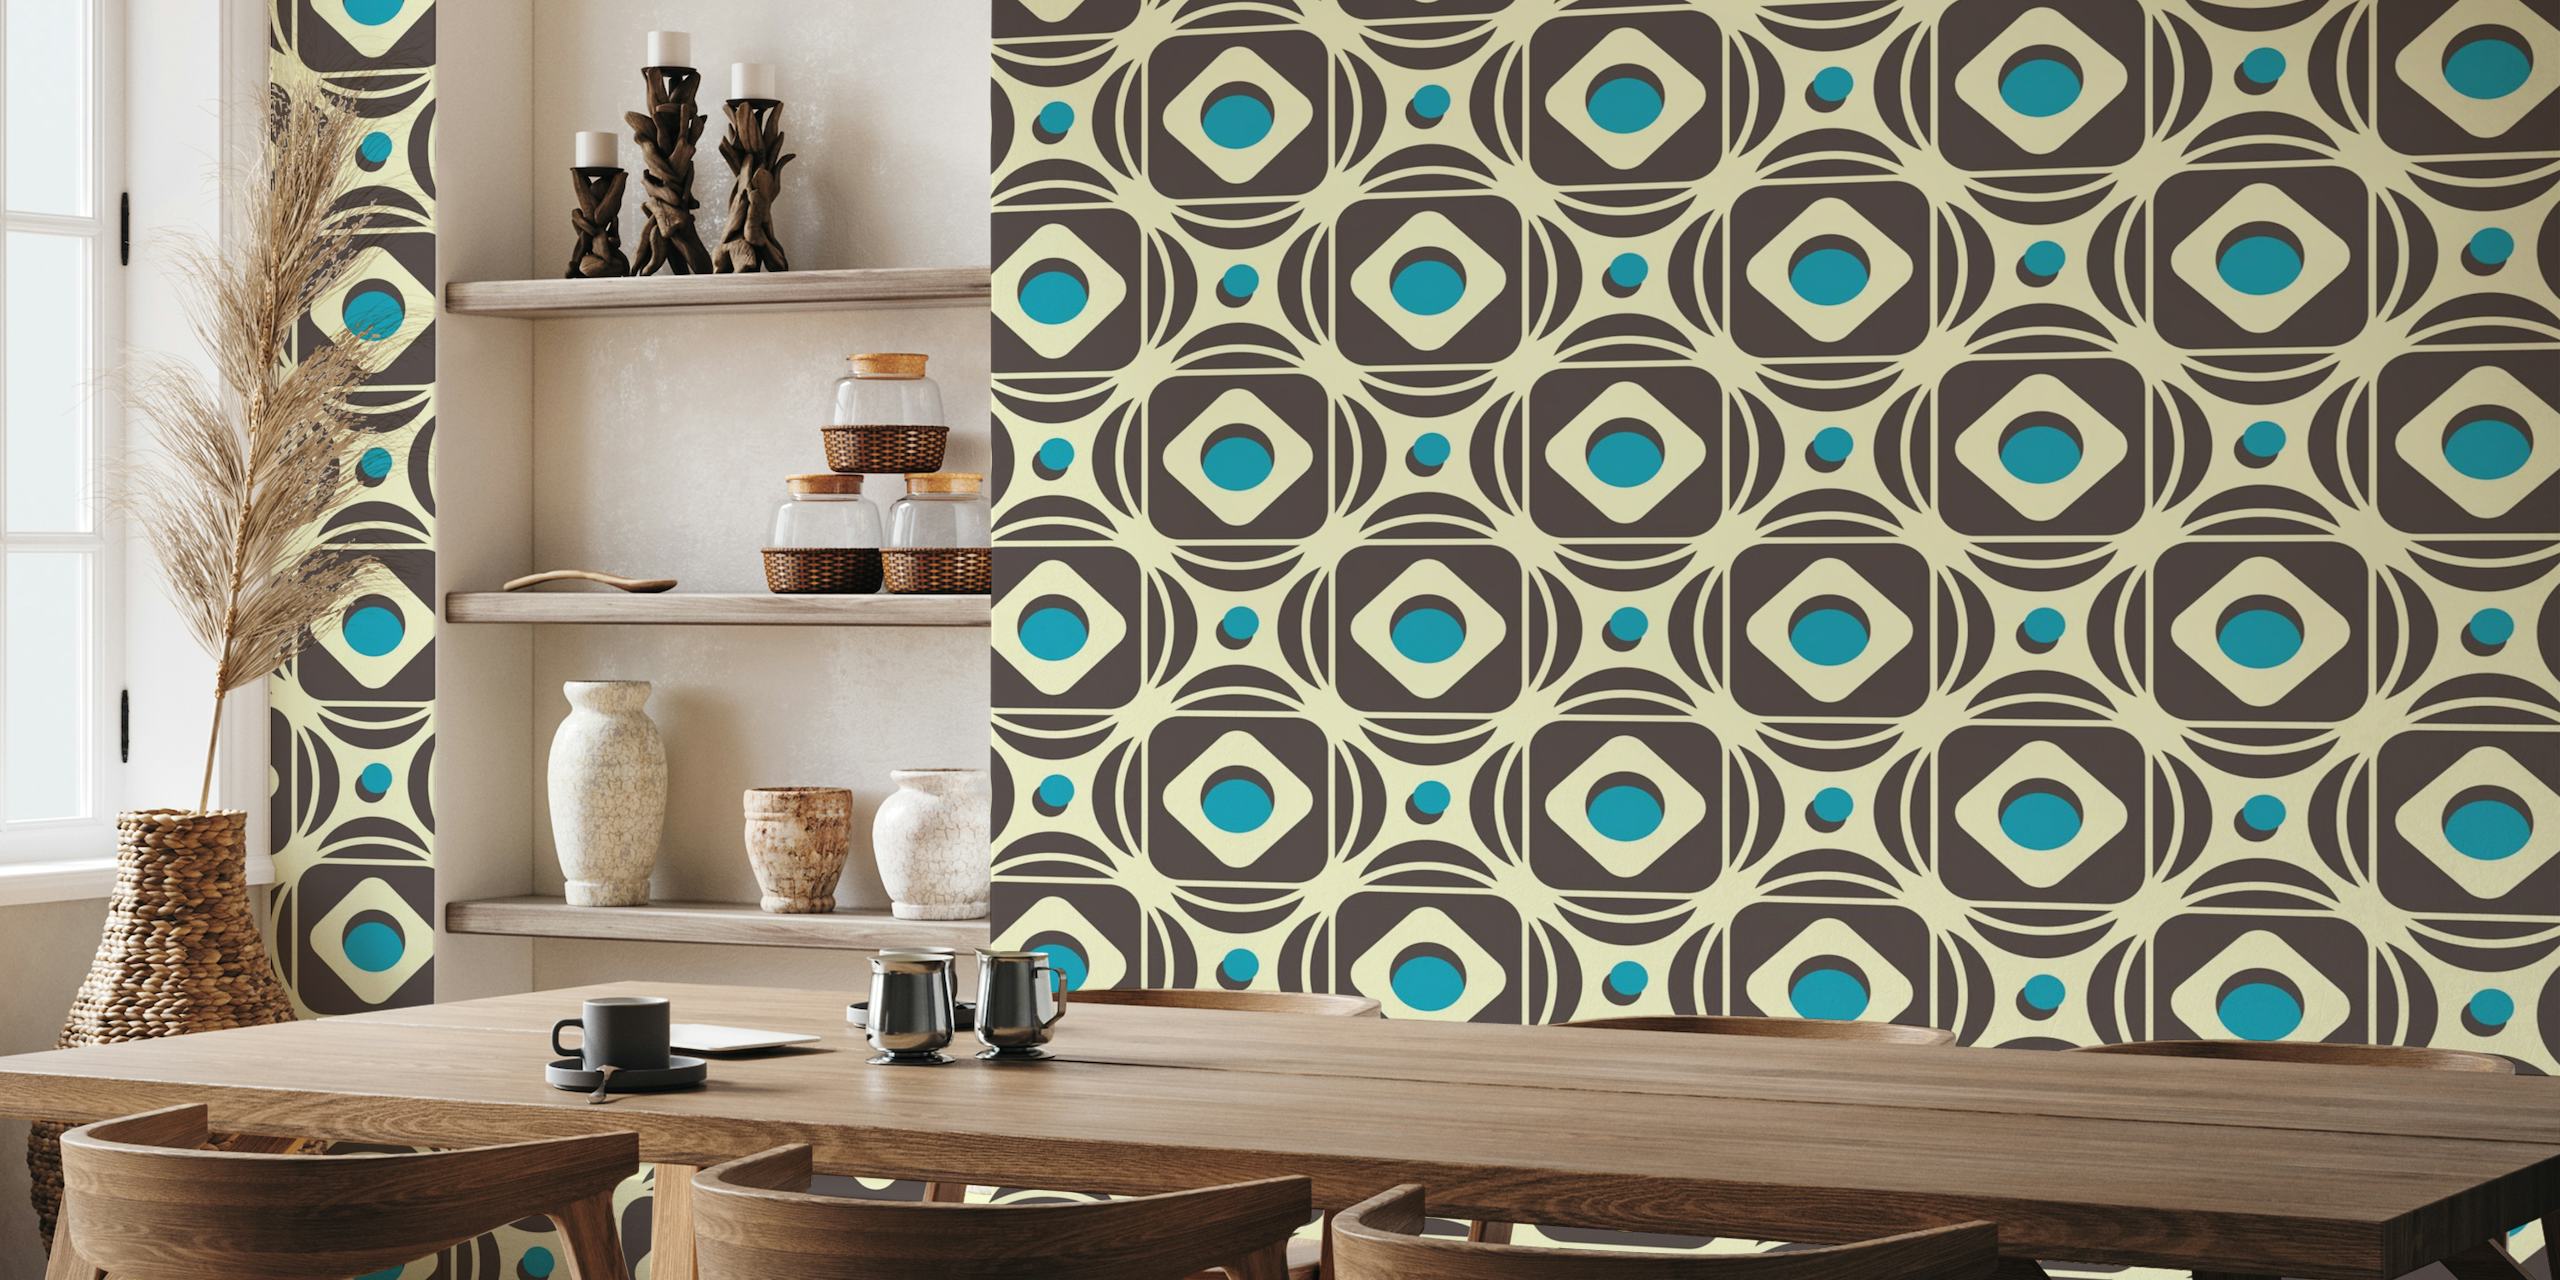 Abstract square tiles pattern (2182) behang